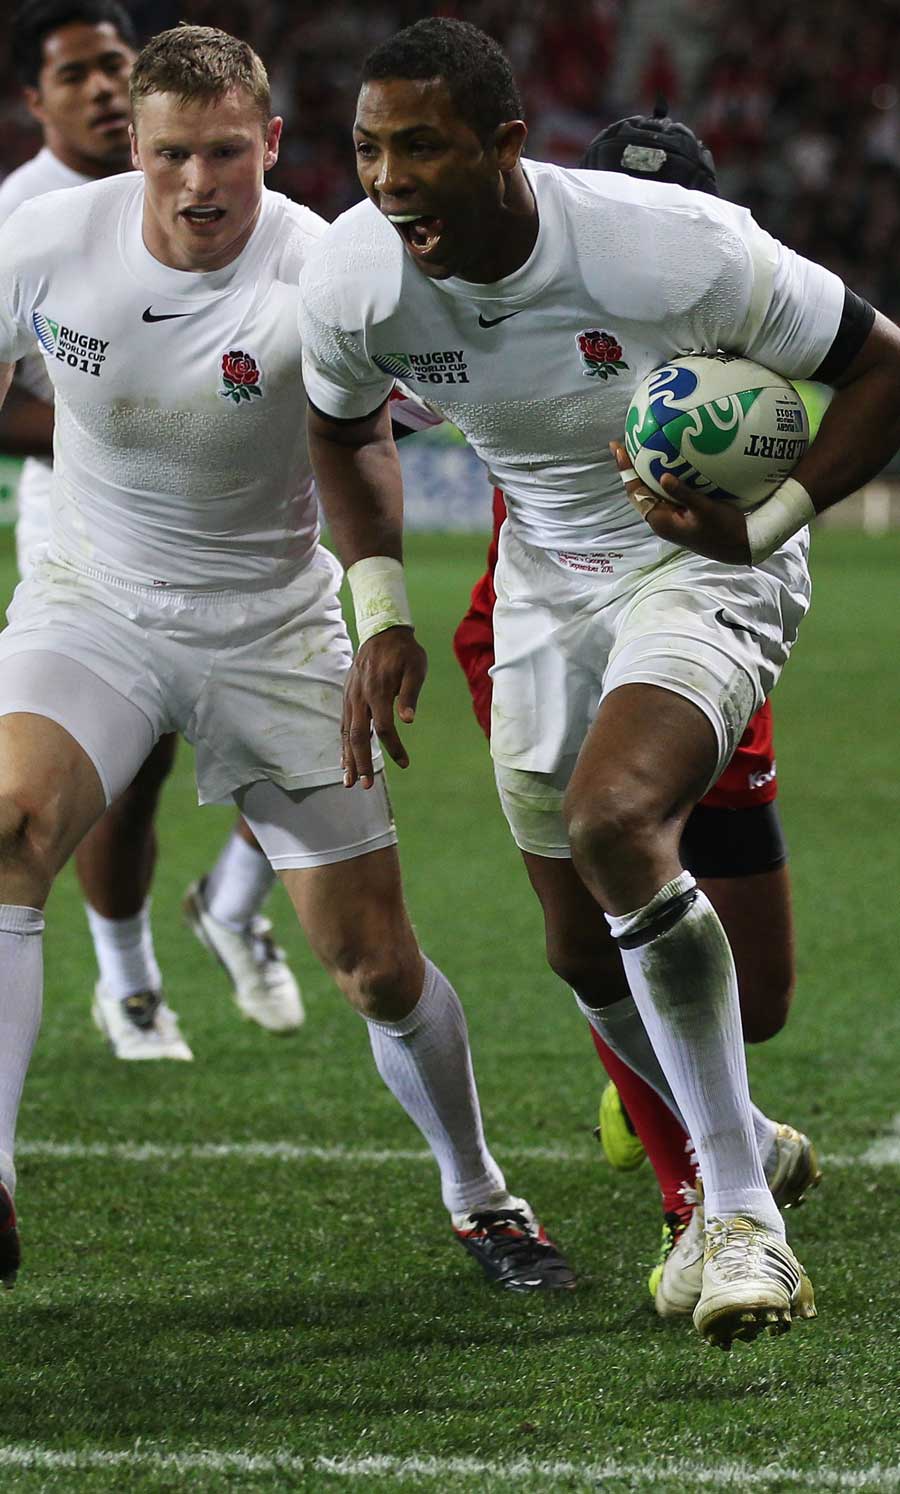 England's Delon Armitage prepares to cross the tryline in the second-half